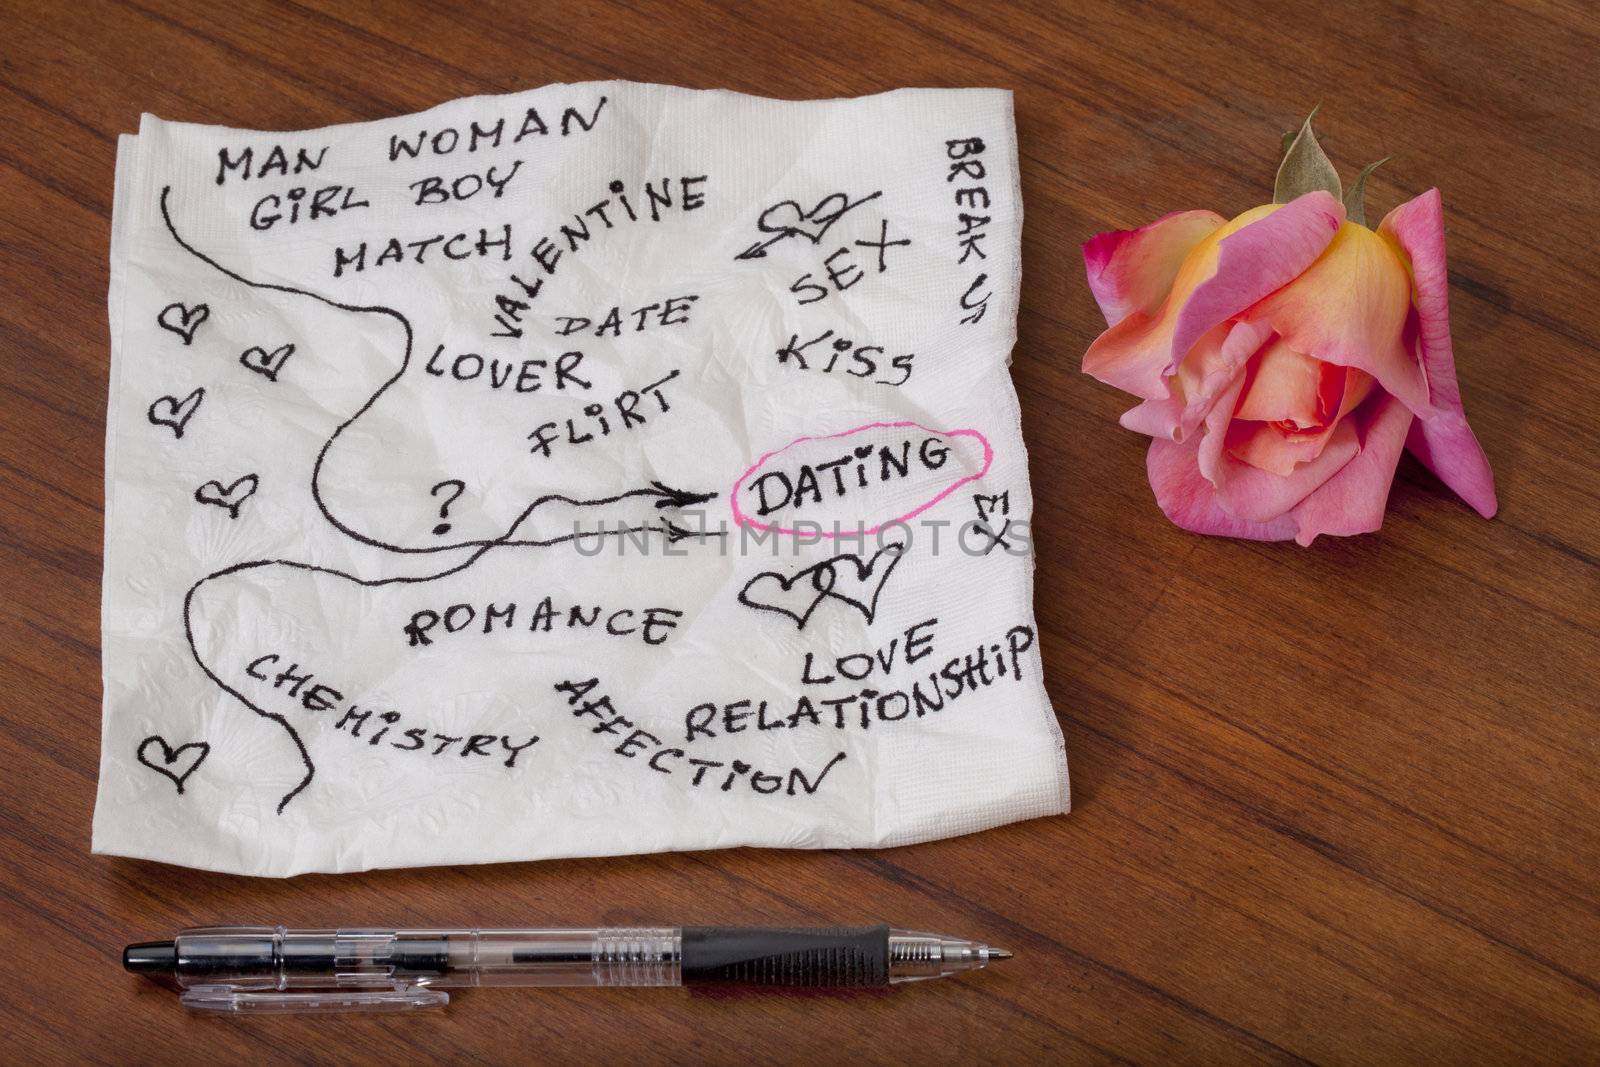 dating, love and romance - napkin doodle, wooden table with beautiful pink and yellow rose